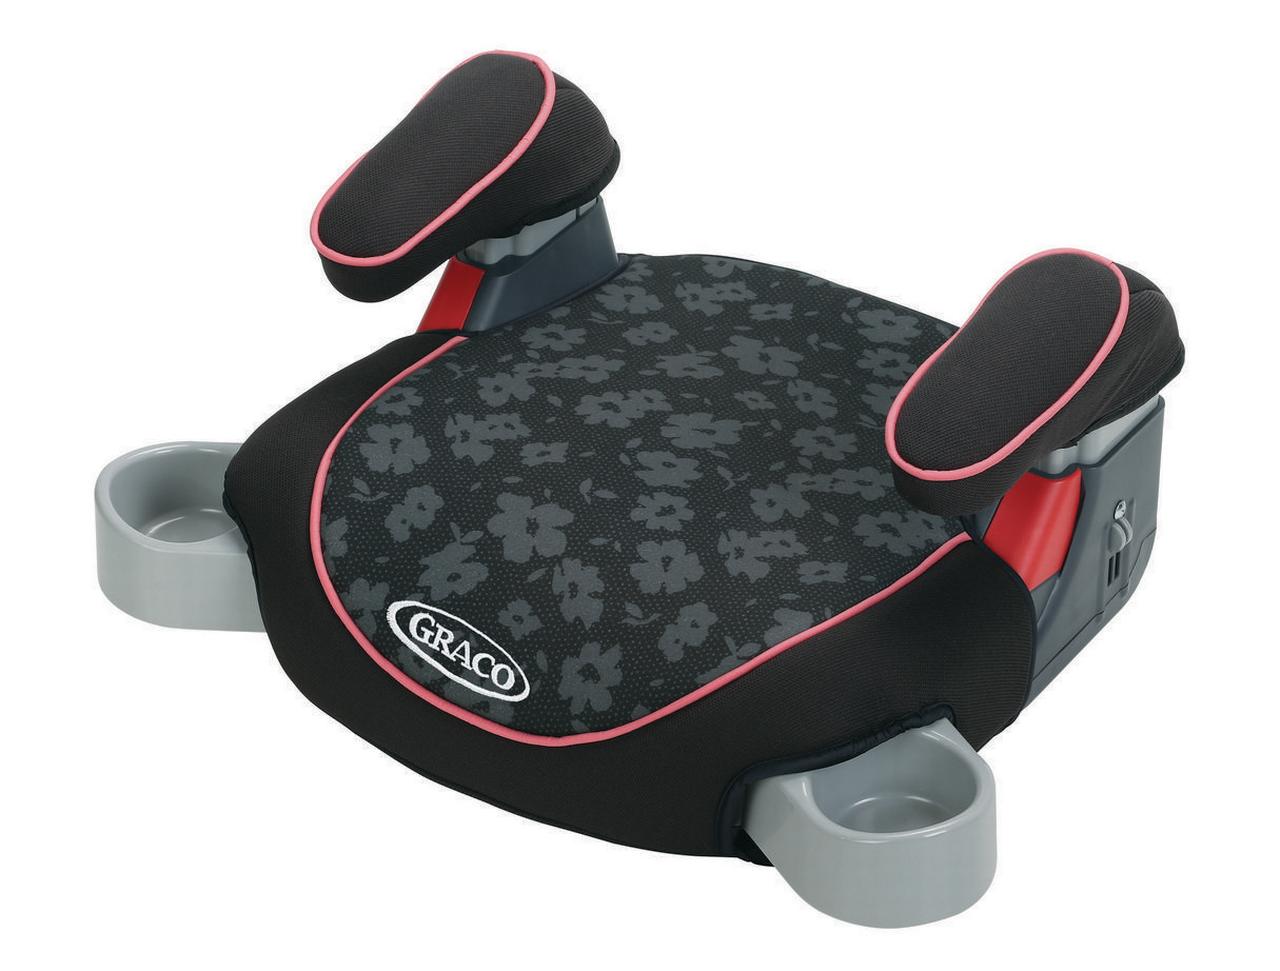 Graco TurboBooster Backless Booster Car Seat, Tansy - image 1 of 4